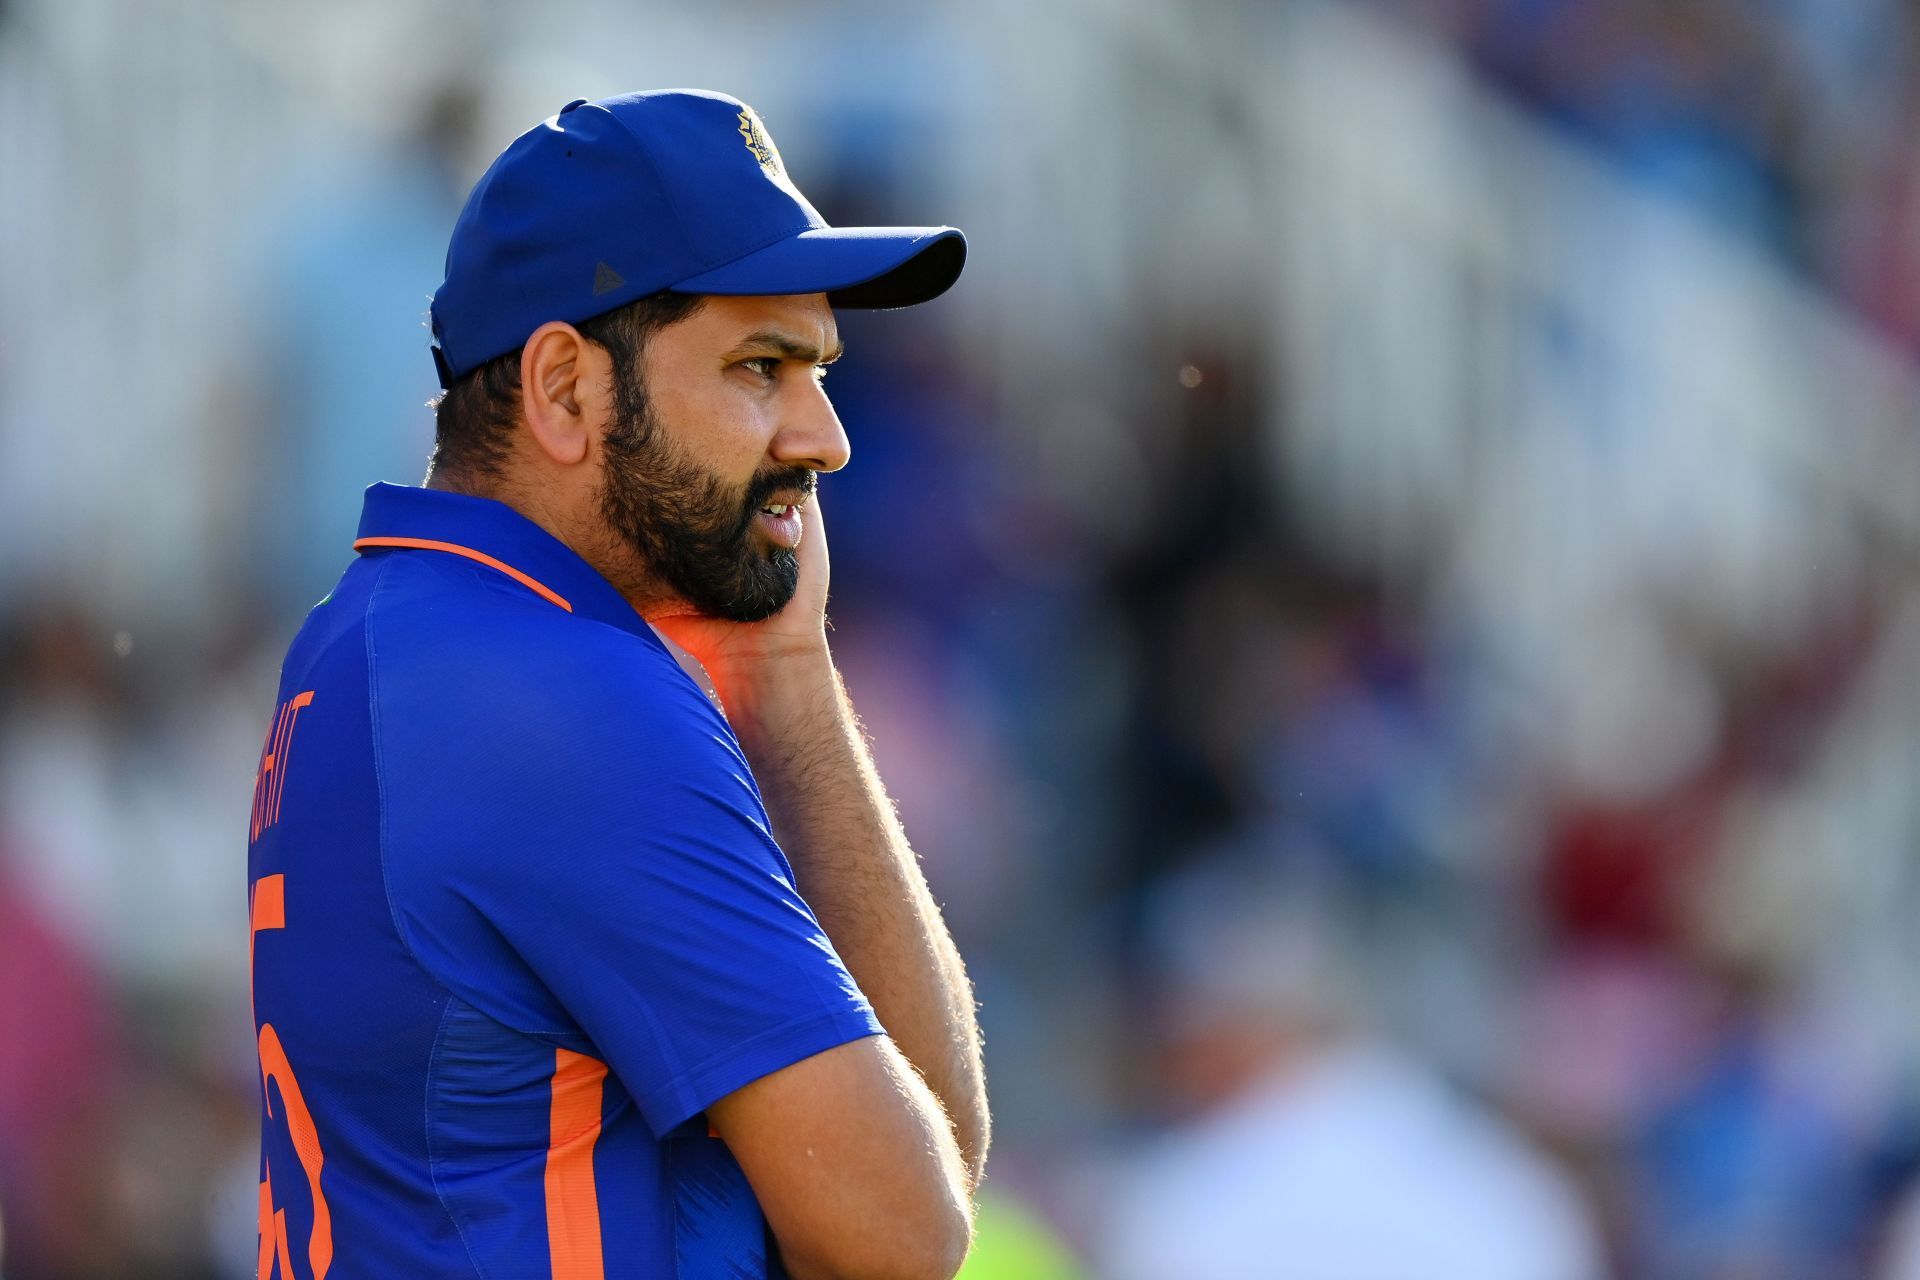 Rohit Sharma retired hurt with a back spasm in the third T20I against West Indies on Tuesday. Pic: Getty Images